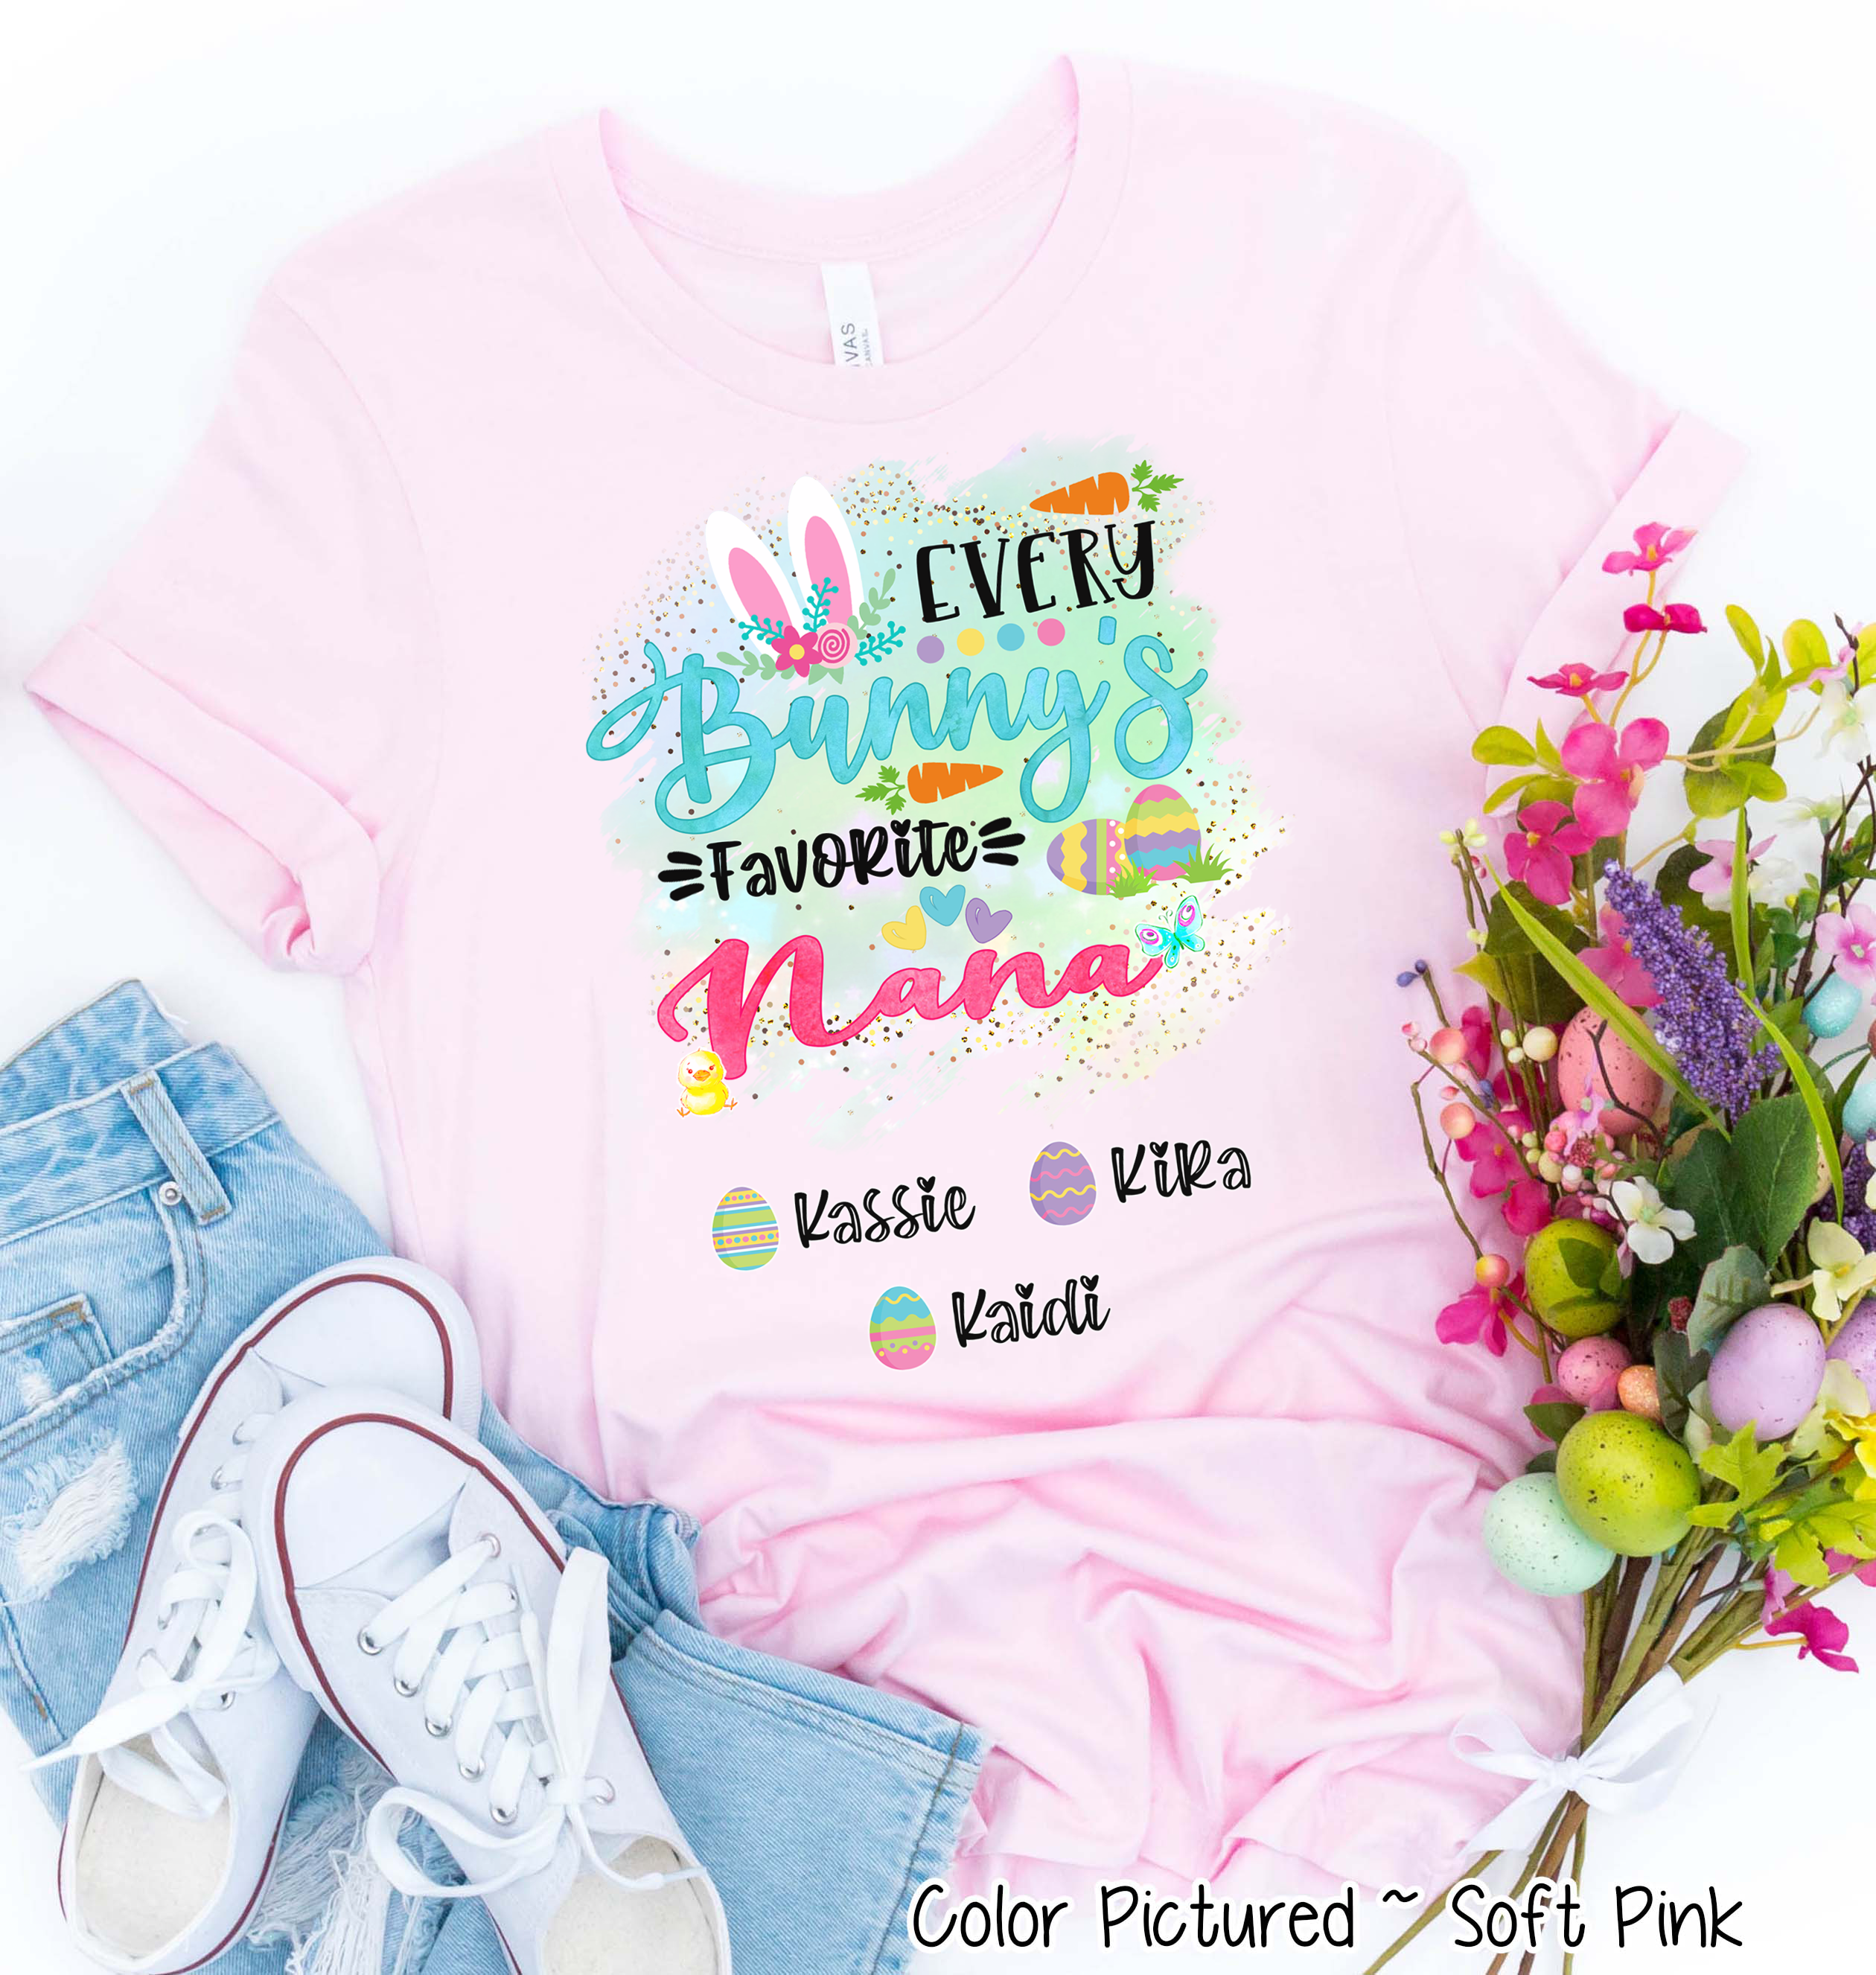 Personalized Shirt For Nana Every Bunny's Favorite & Easter Eggs with Custom Grandkids Name Easter Day Tee